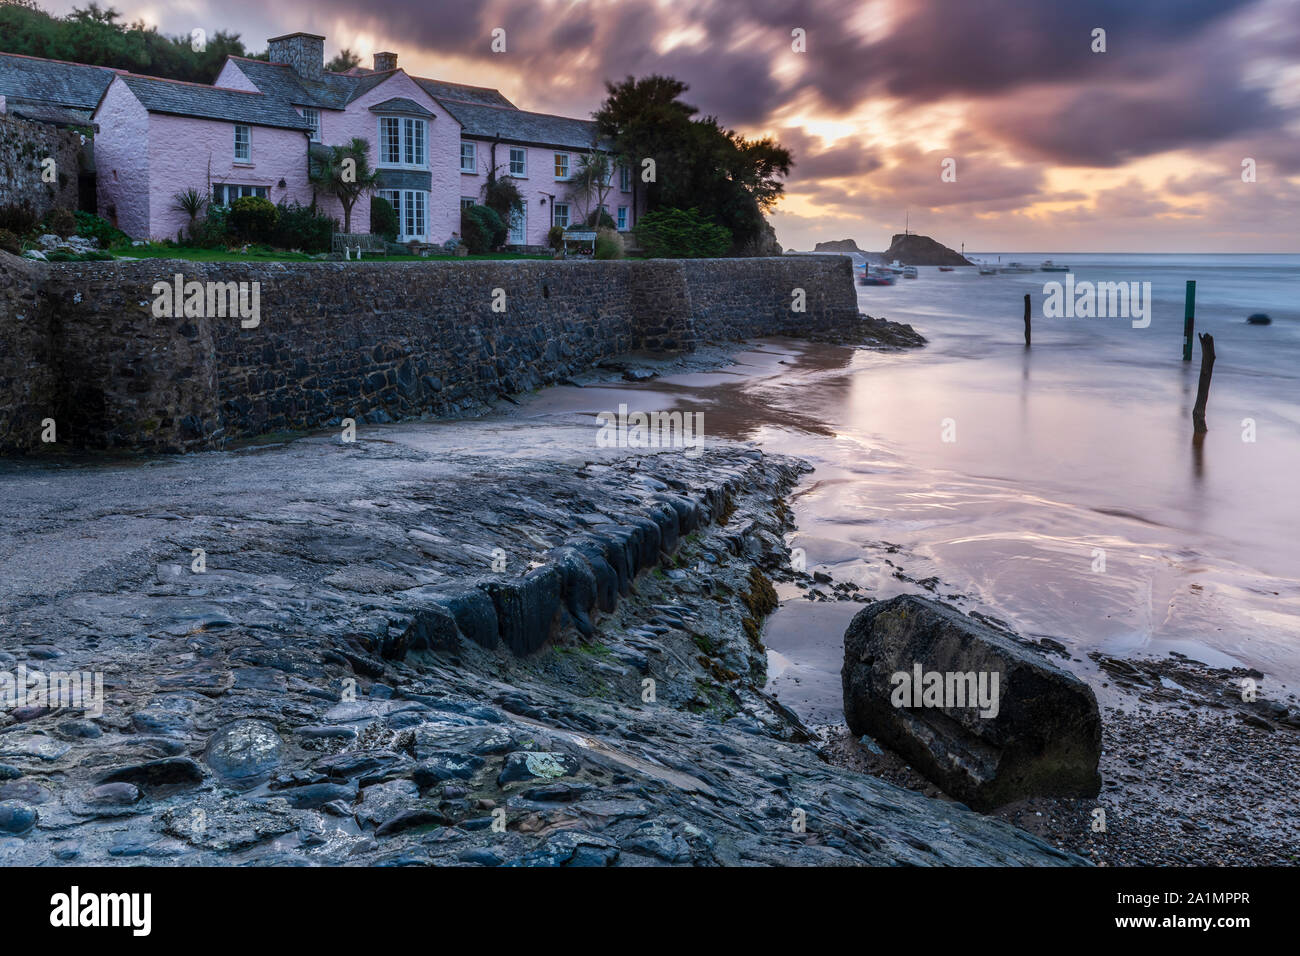 Bude, North Cornwall, England. Friday 27th September 2019. UK Weather. After a stormy day, the sun sets over the breakwater, as heavy showers and strong winds continue to batter Bude in North Cornwall. Terry Mathews/Alamy Live News. Stock Photo